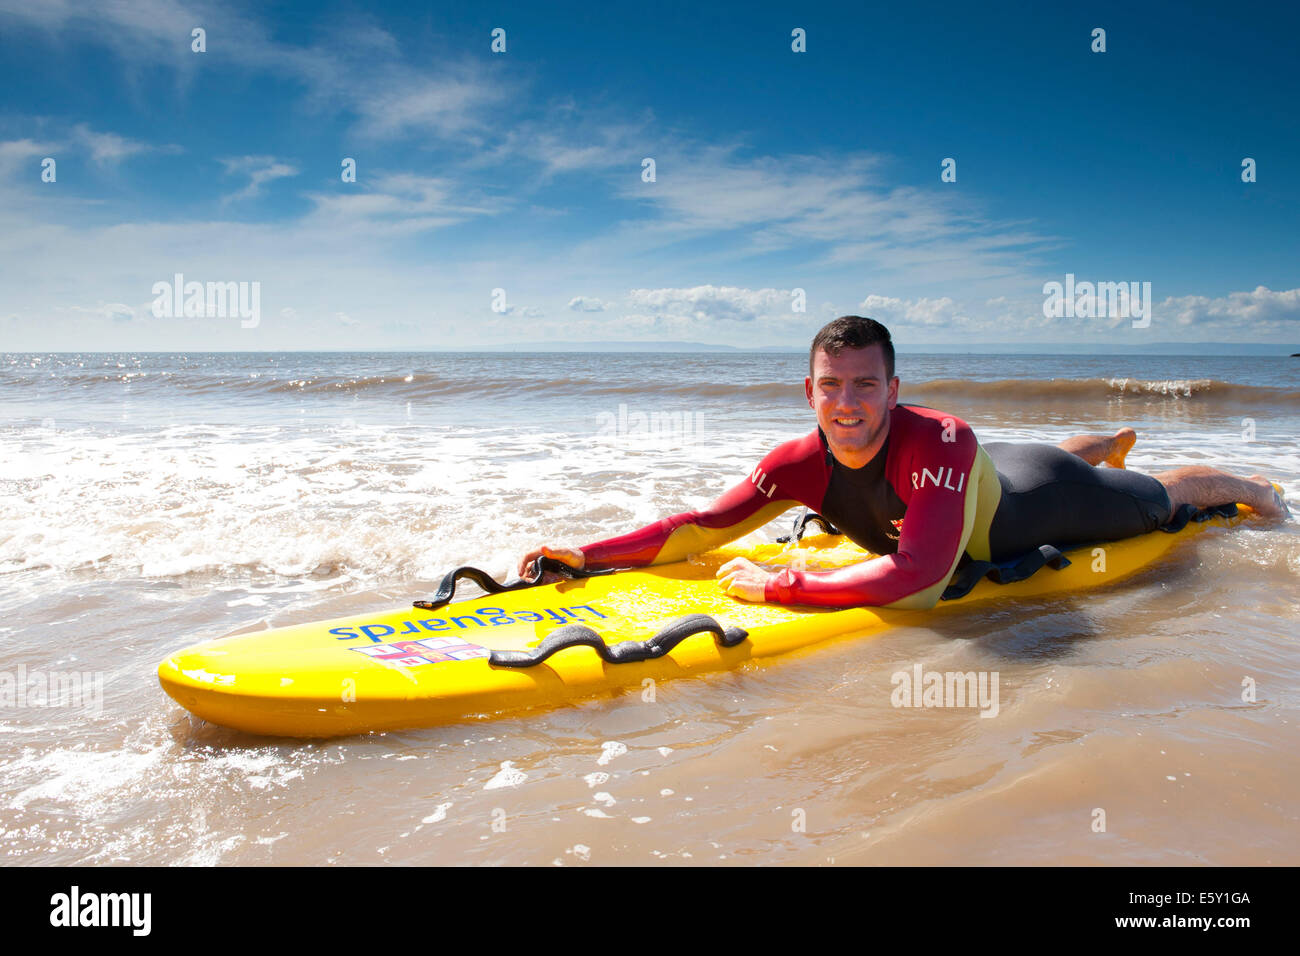 RNLI Rettungsschwimmer am Strand Whitmore Bay in Barry, South Wales. Stockfoto